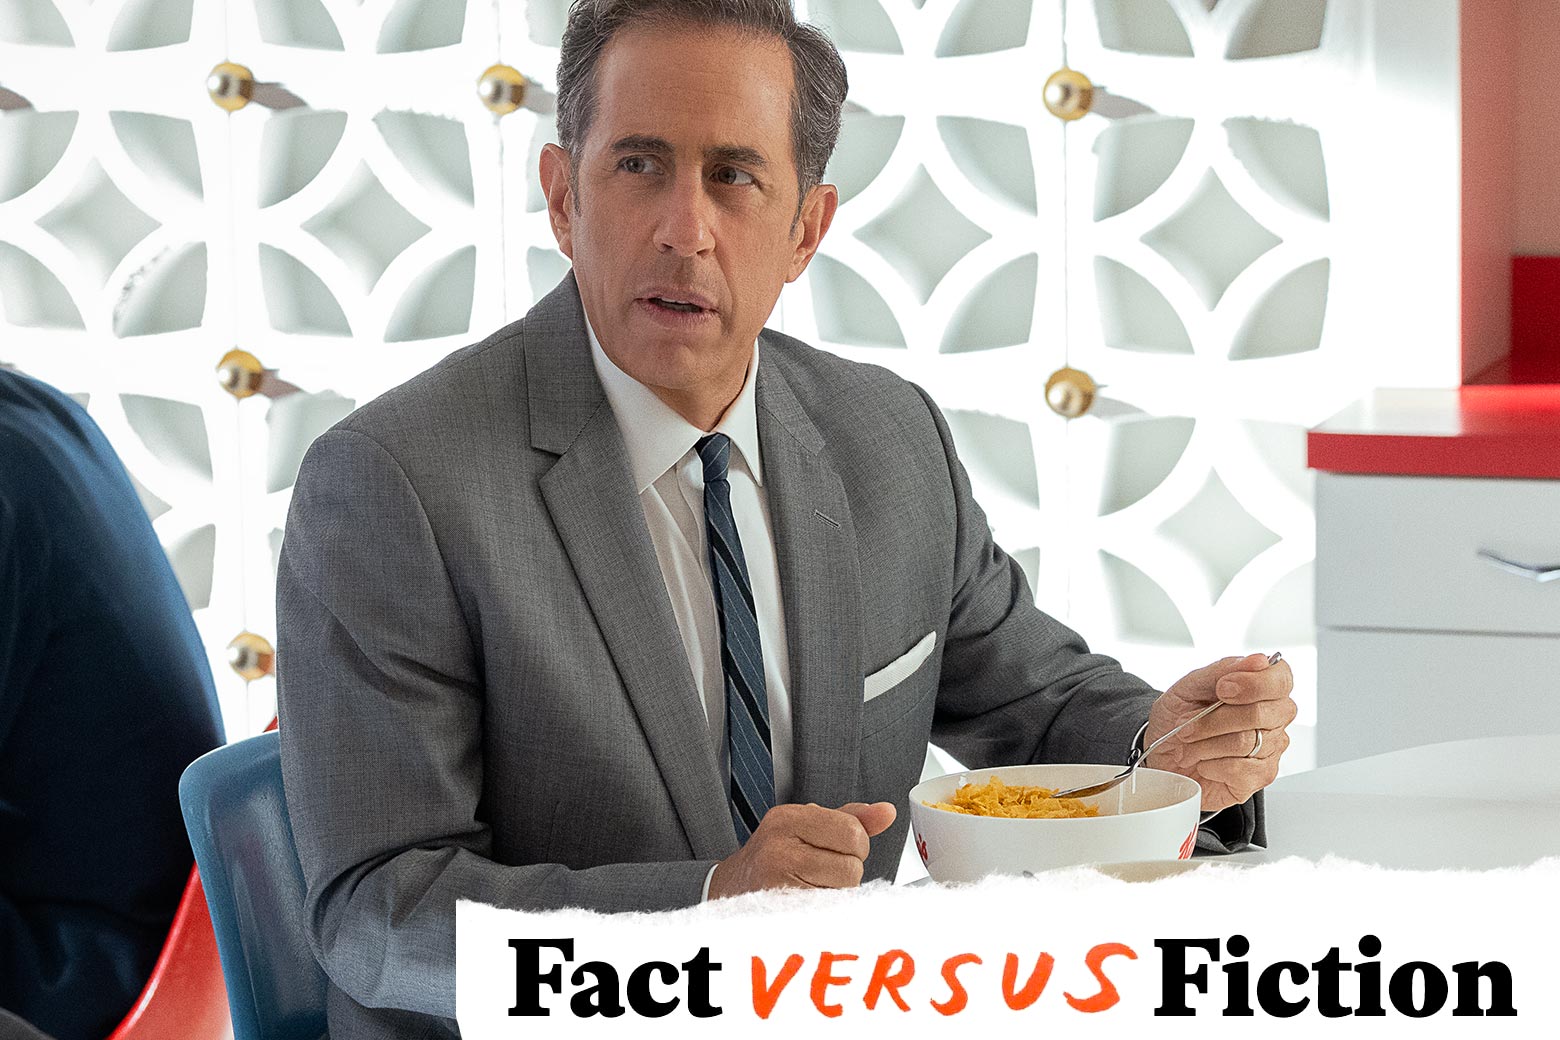 Jerry Seinfeld eats cereal.